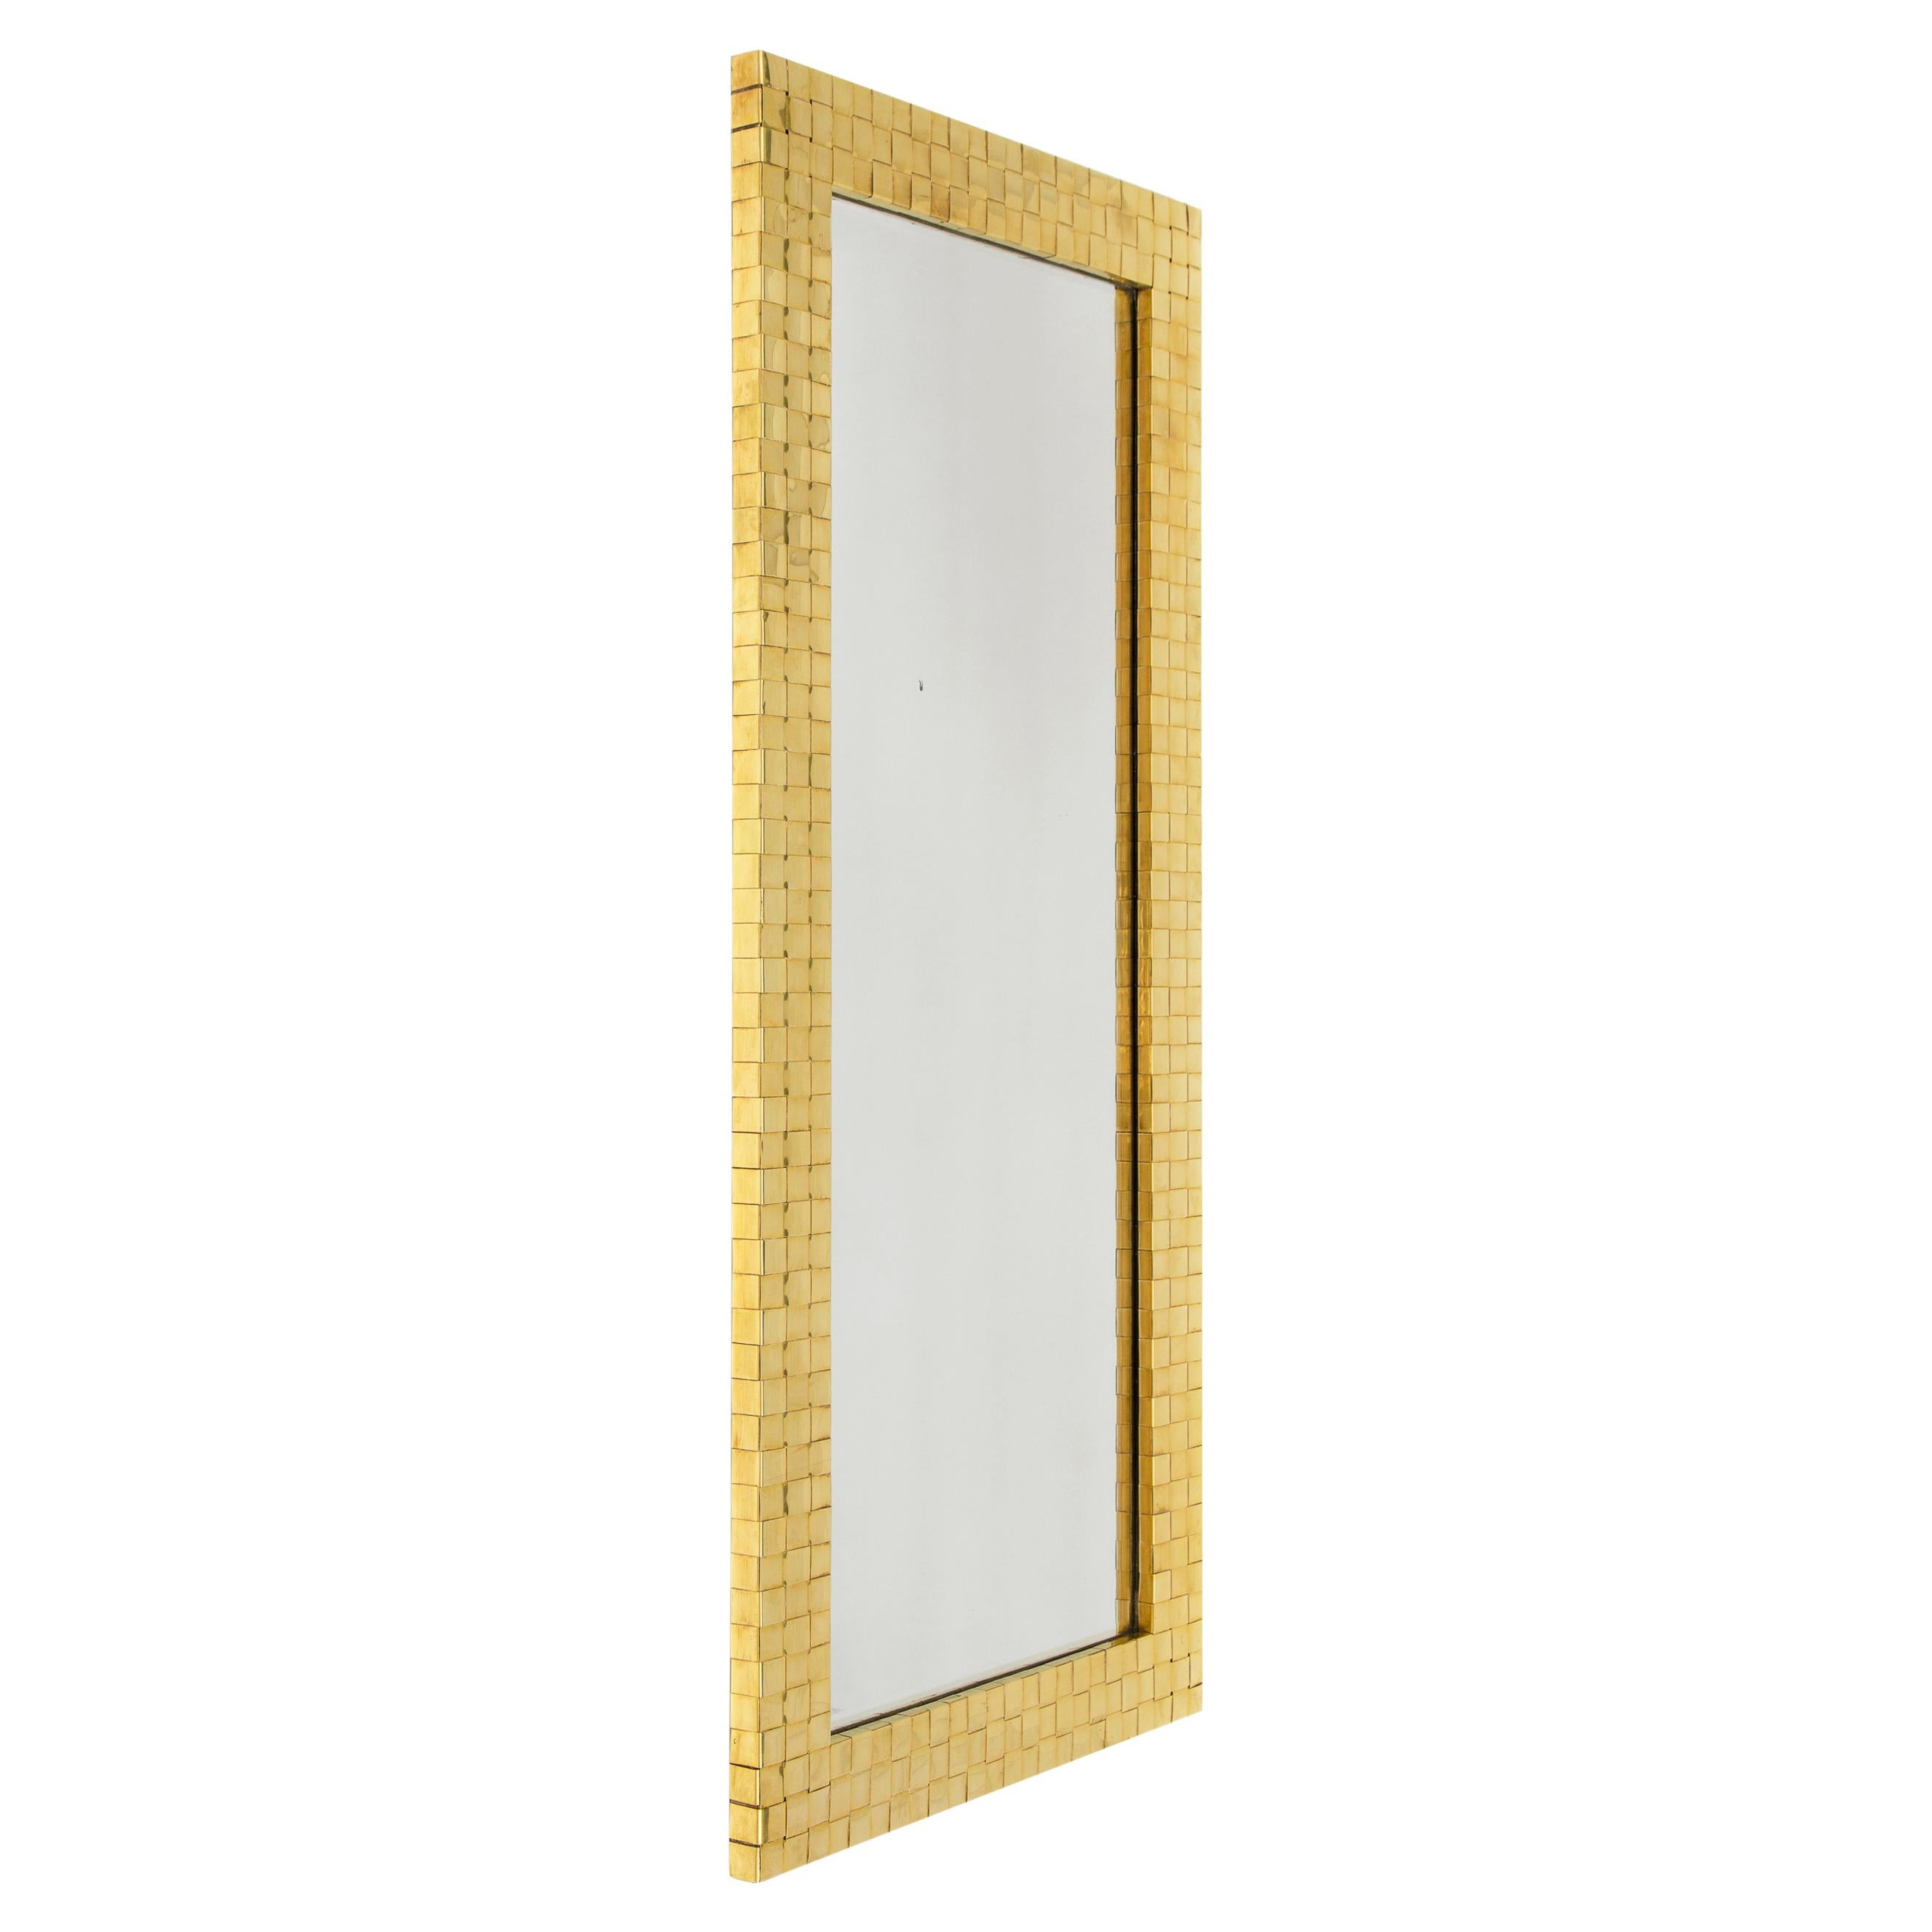 Chapman brass woven front mirror, can be displayed Vertical or horizontally.
Label on back (Chapman 1978).